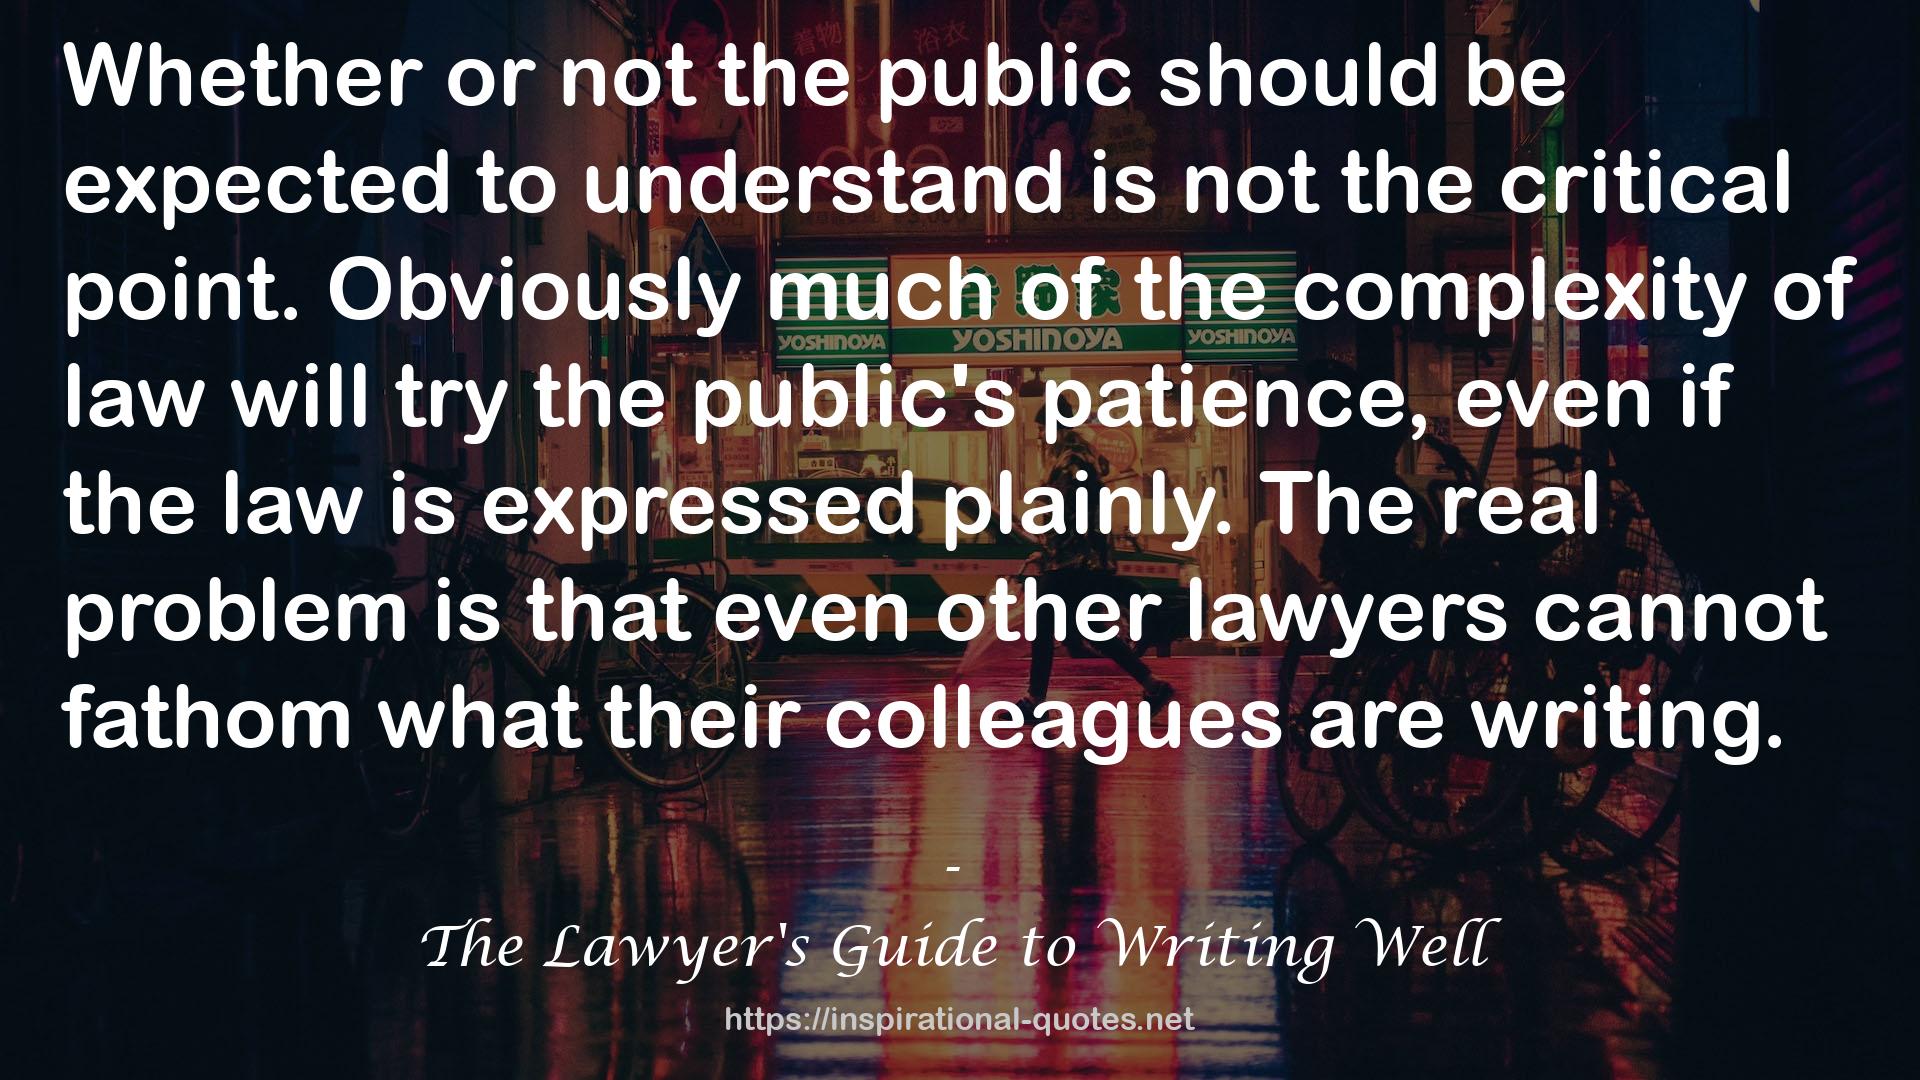 The Lawyer's Guide to Writing Well QUOTES